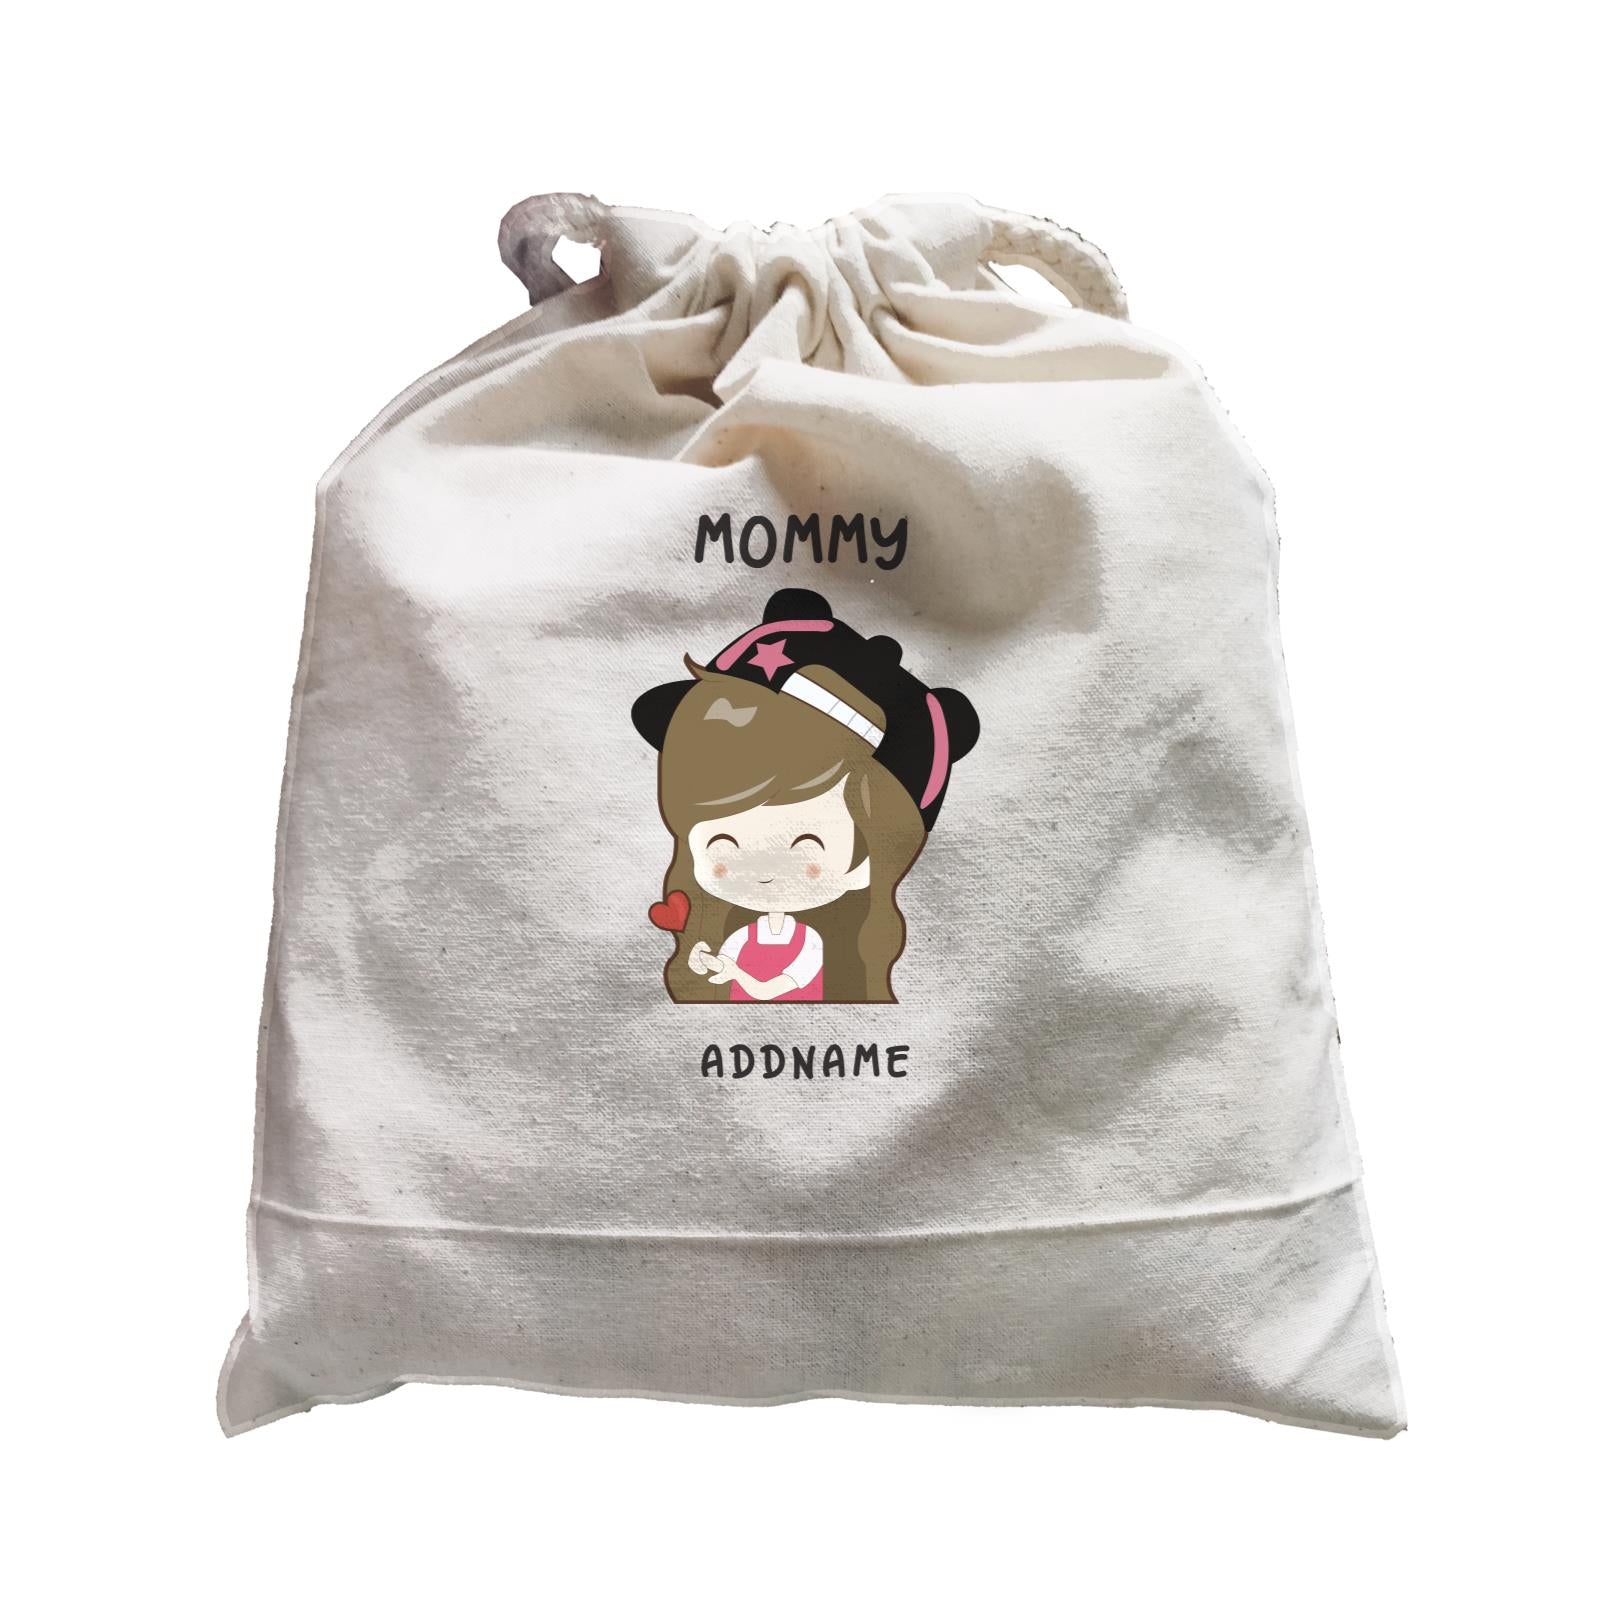 My Lovely Family Series Mommy Addname Satchel